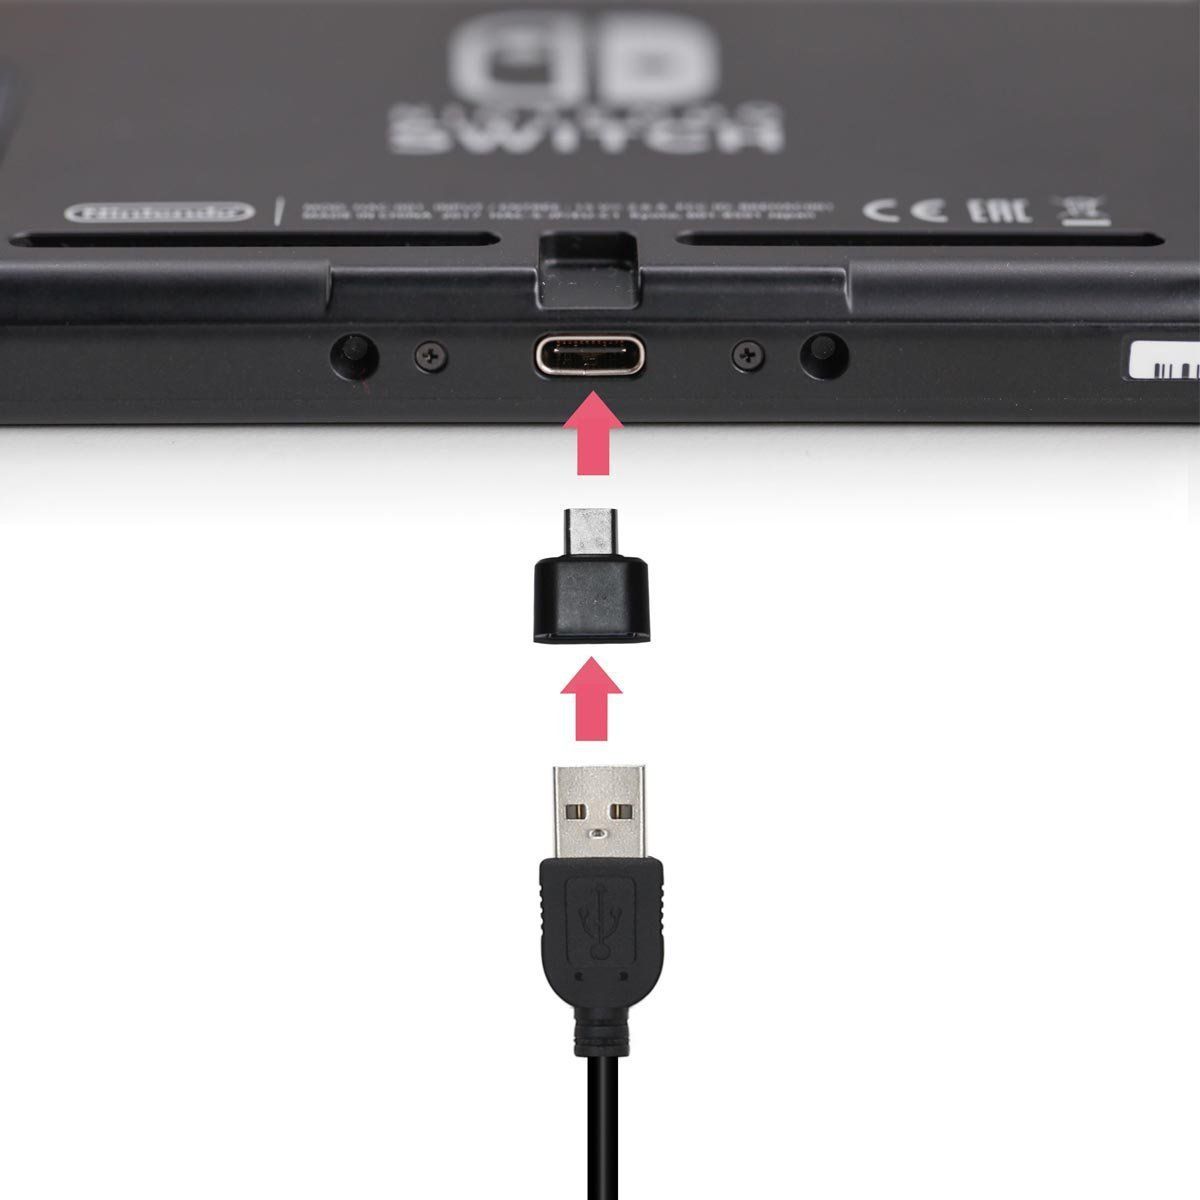 DOBE-TNS-901-For-Nintendo-Switch-Pro-USB-Cable-Wired-Game-Controller-Gamepadmale-Type-C-to-USB-adapt-1764627